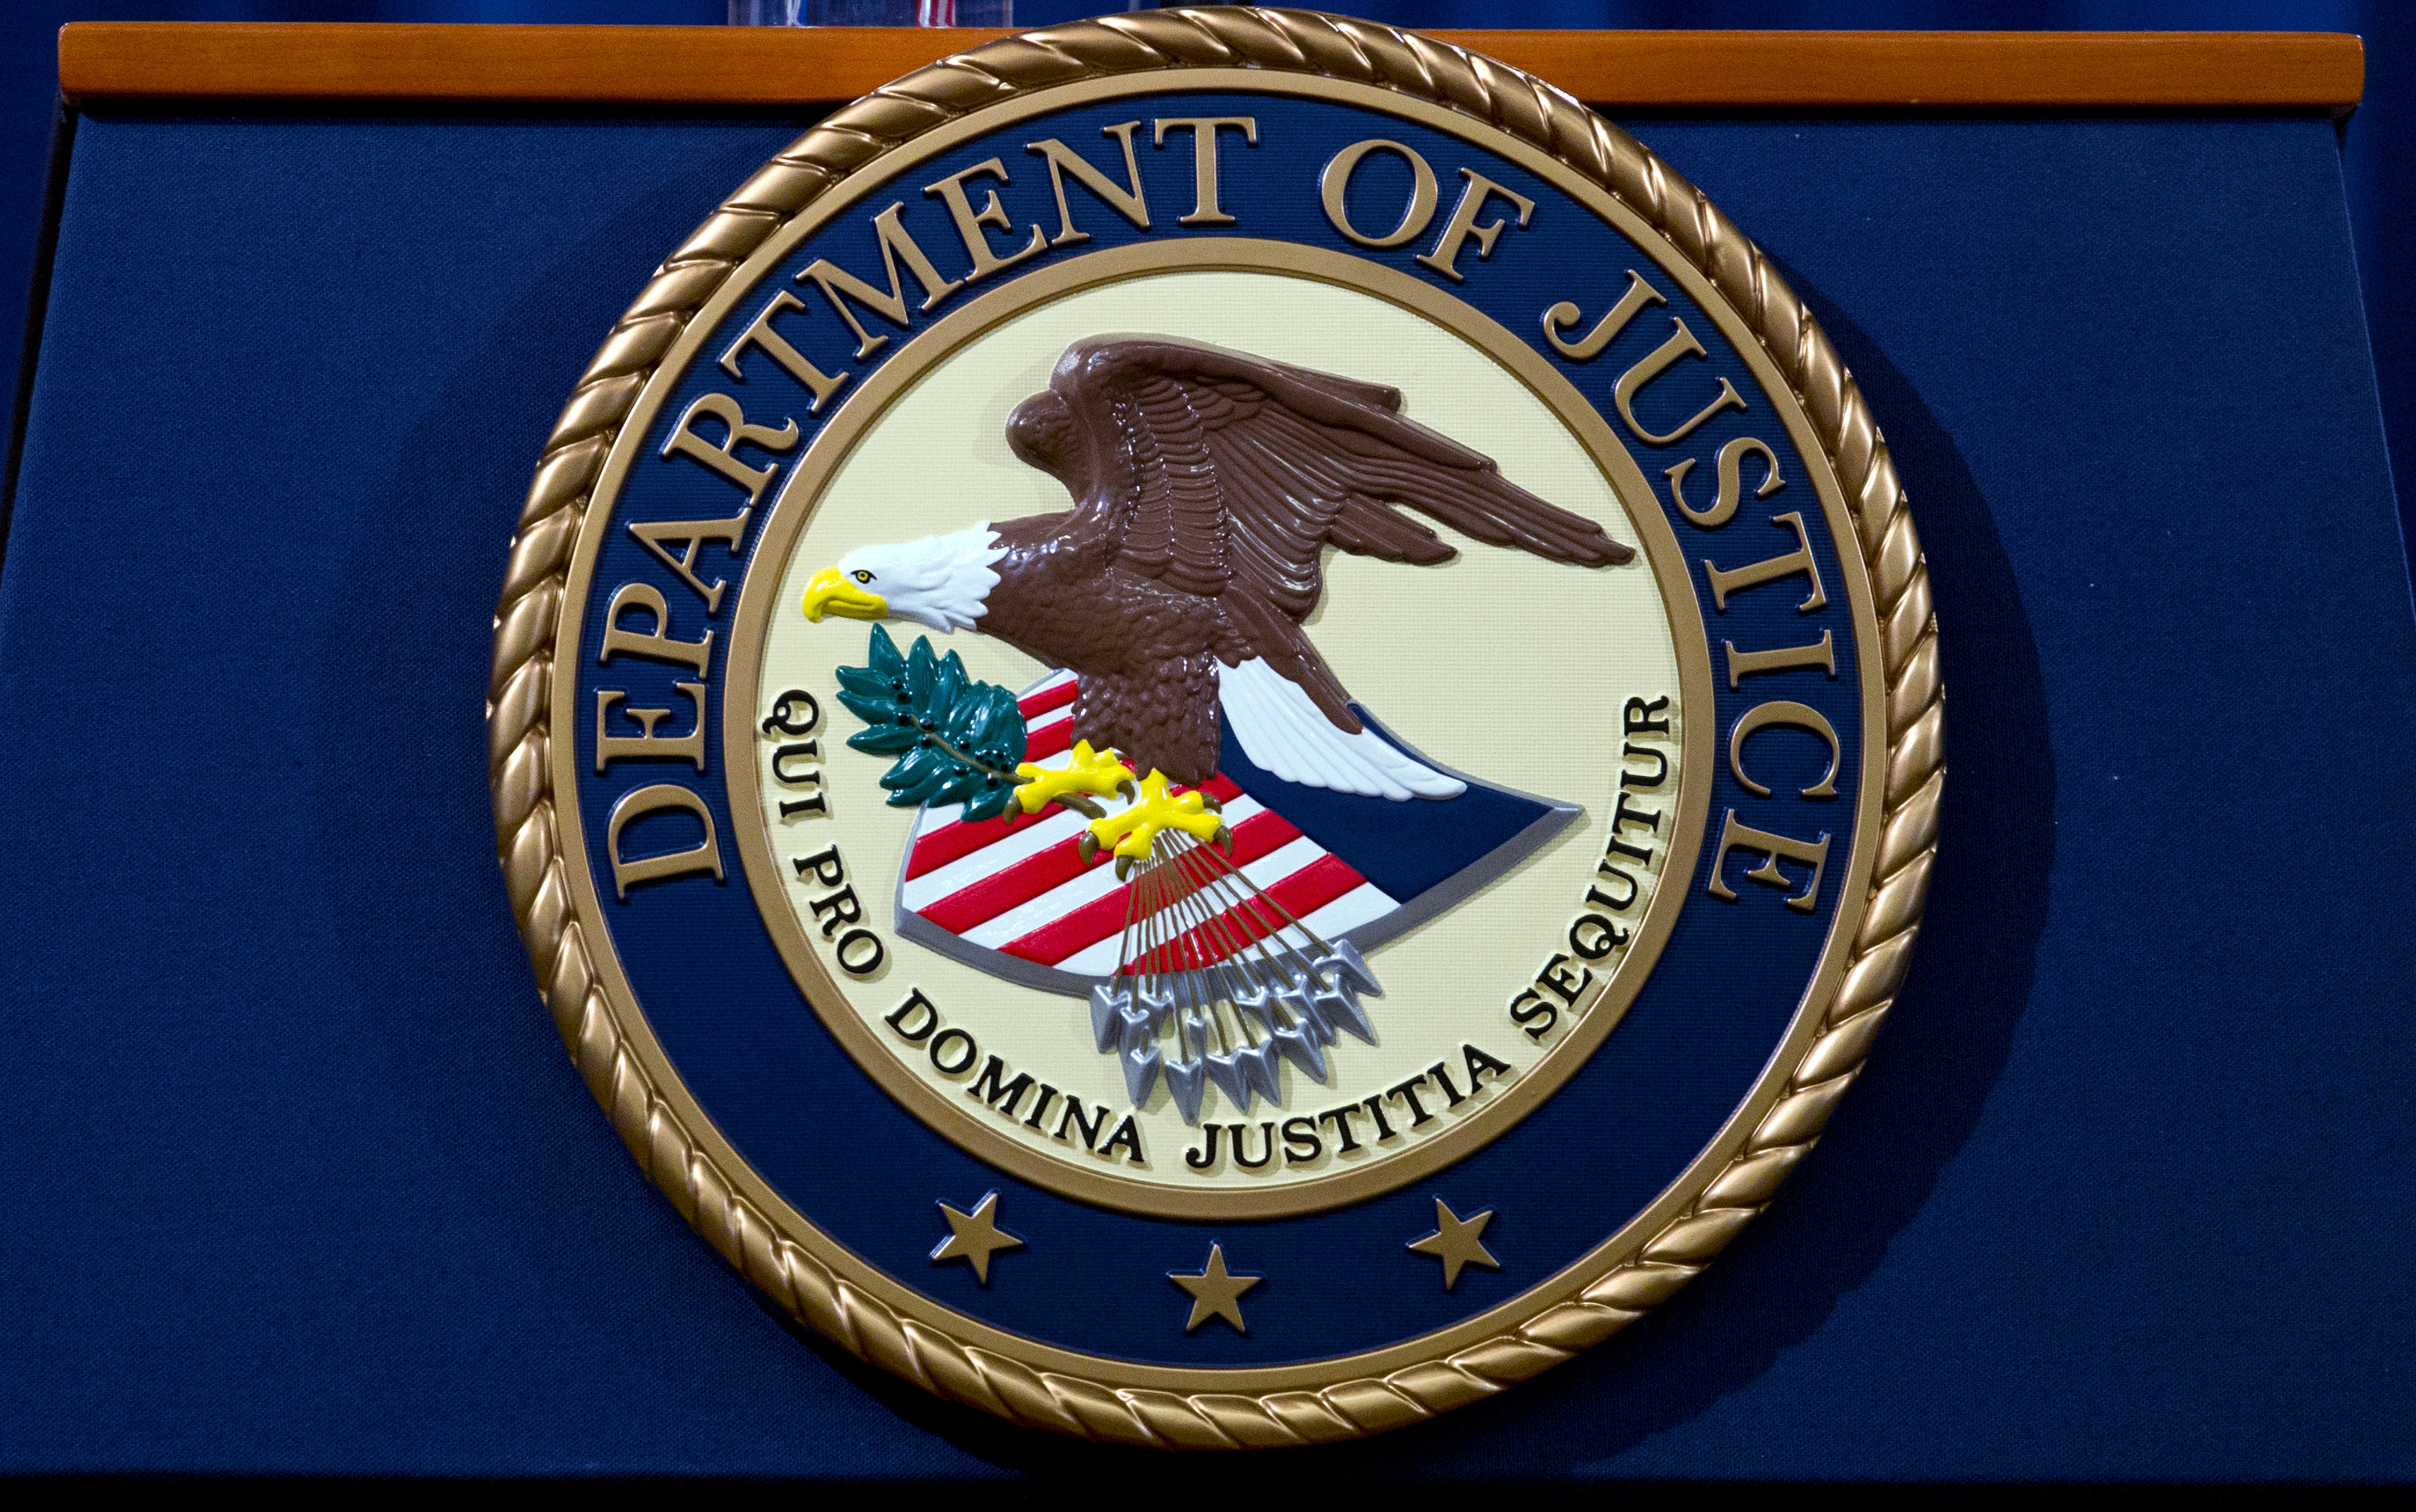 The Department of Justice seal is seen in Washington, 28 November, 2018